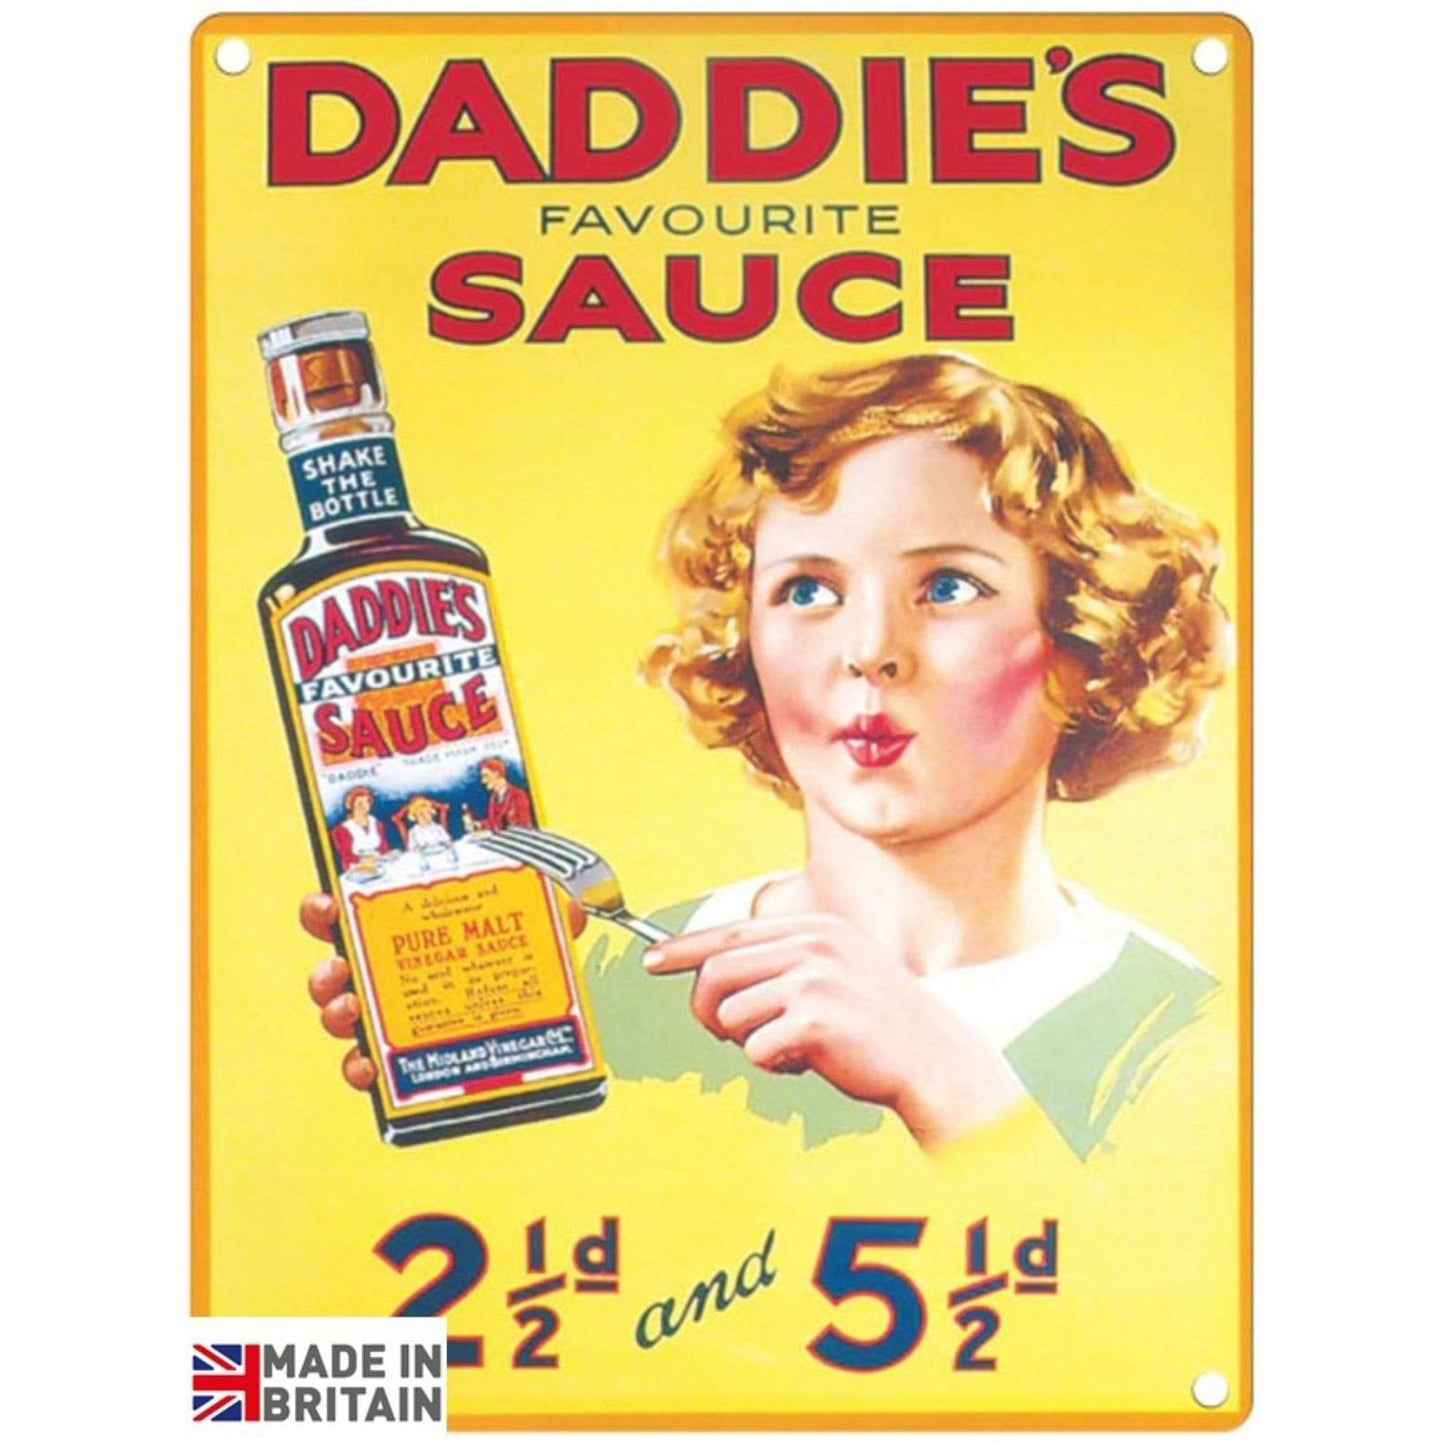 Small Metal Sign 45 x 37.5cm Vintage Retro Daddie's Sauce - Ashton and Finch